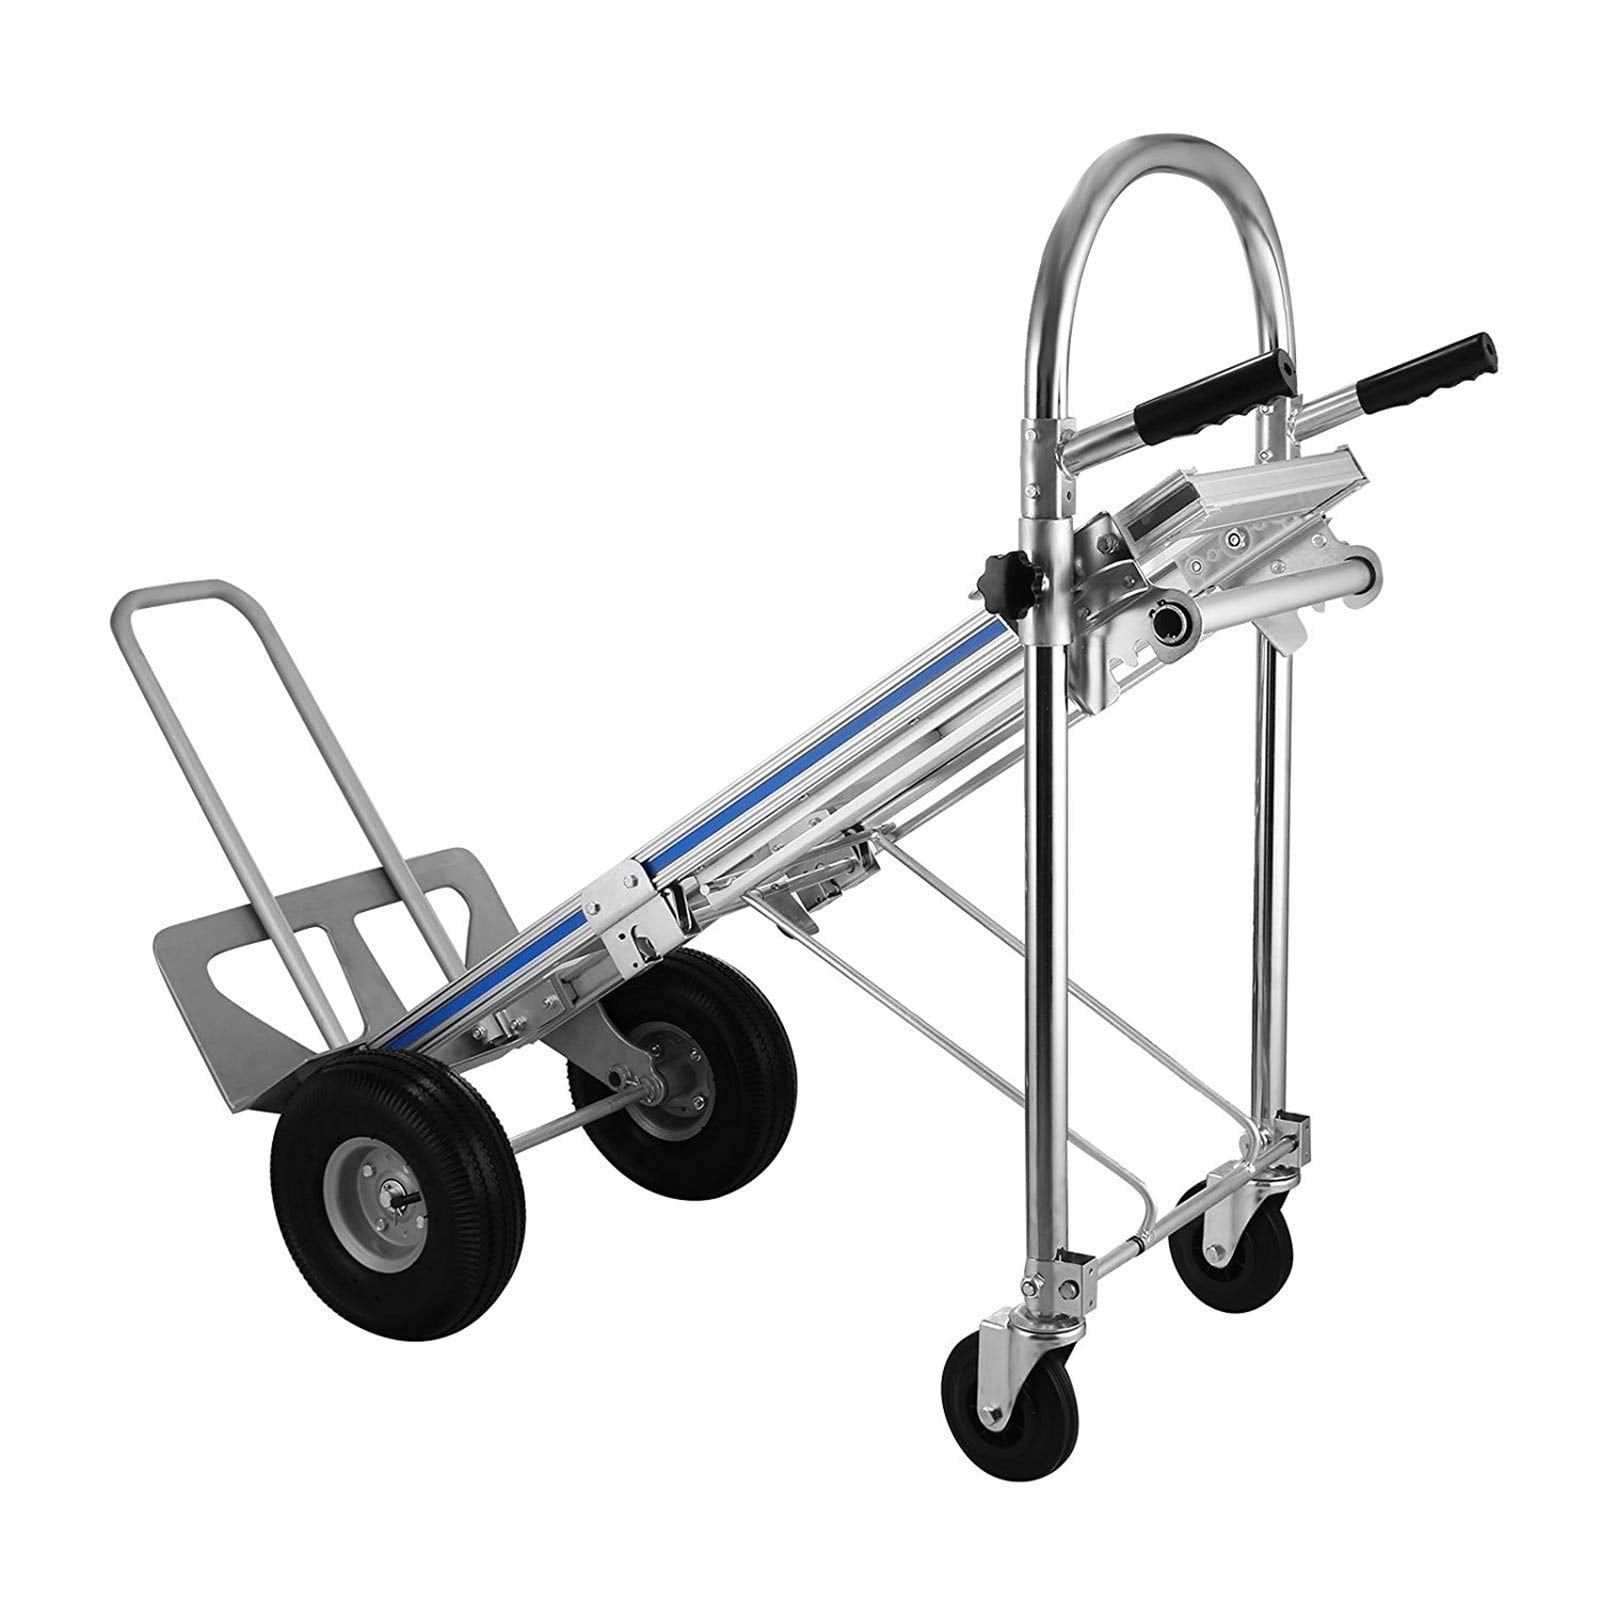 2 in 1 Folding Aluminum Hand Truck 770LBS Convertible Portable Dolly 4 Wheels 